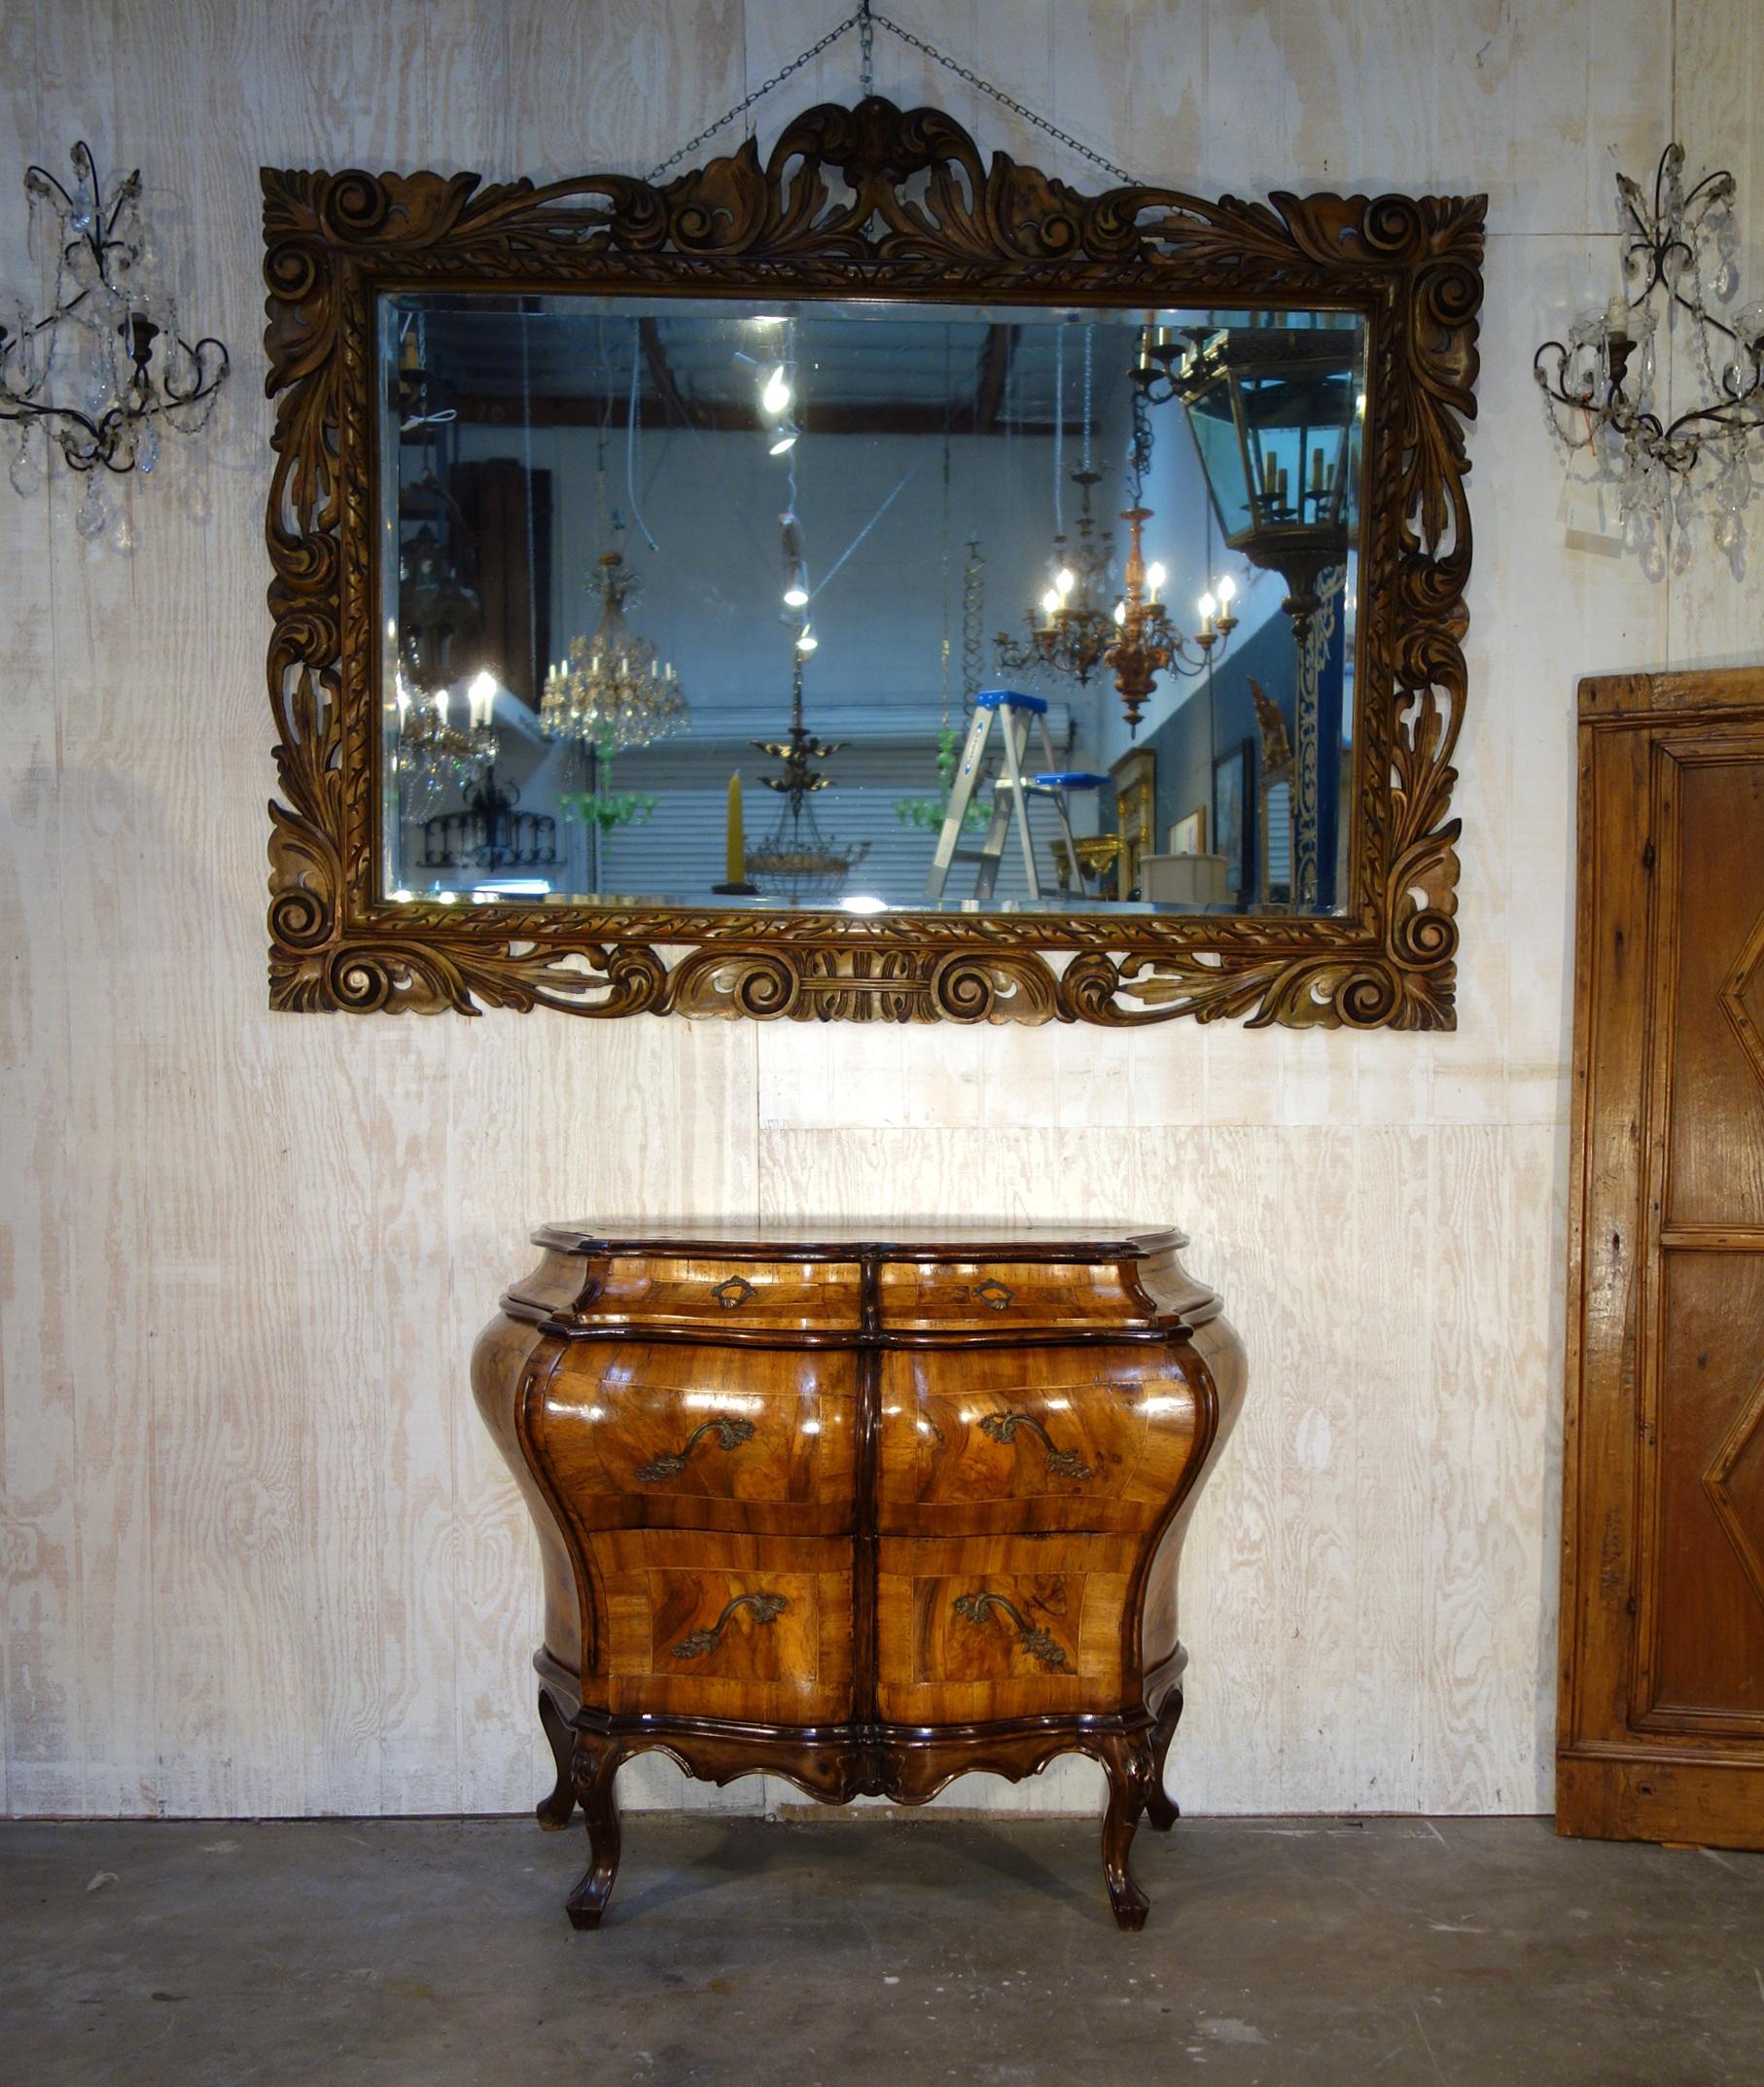 Italian Venetian Louis XIV Rococo Walnut Burl Veneer Credenza, circa 1880.
Lovely and striking two-tone serpentine shaped credenzino commode of carved walnut solids, gorgeous matching burled veneers and inlays, featuring 1 upper smaller and 2 larger